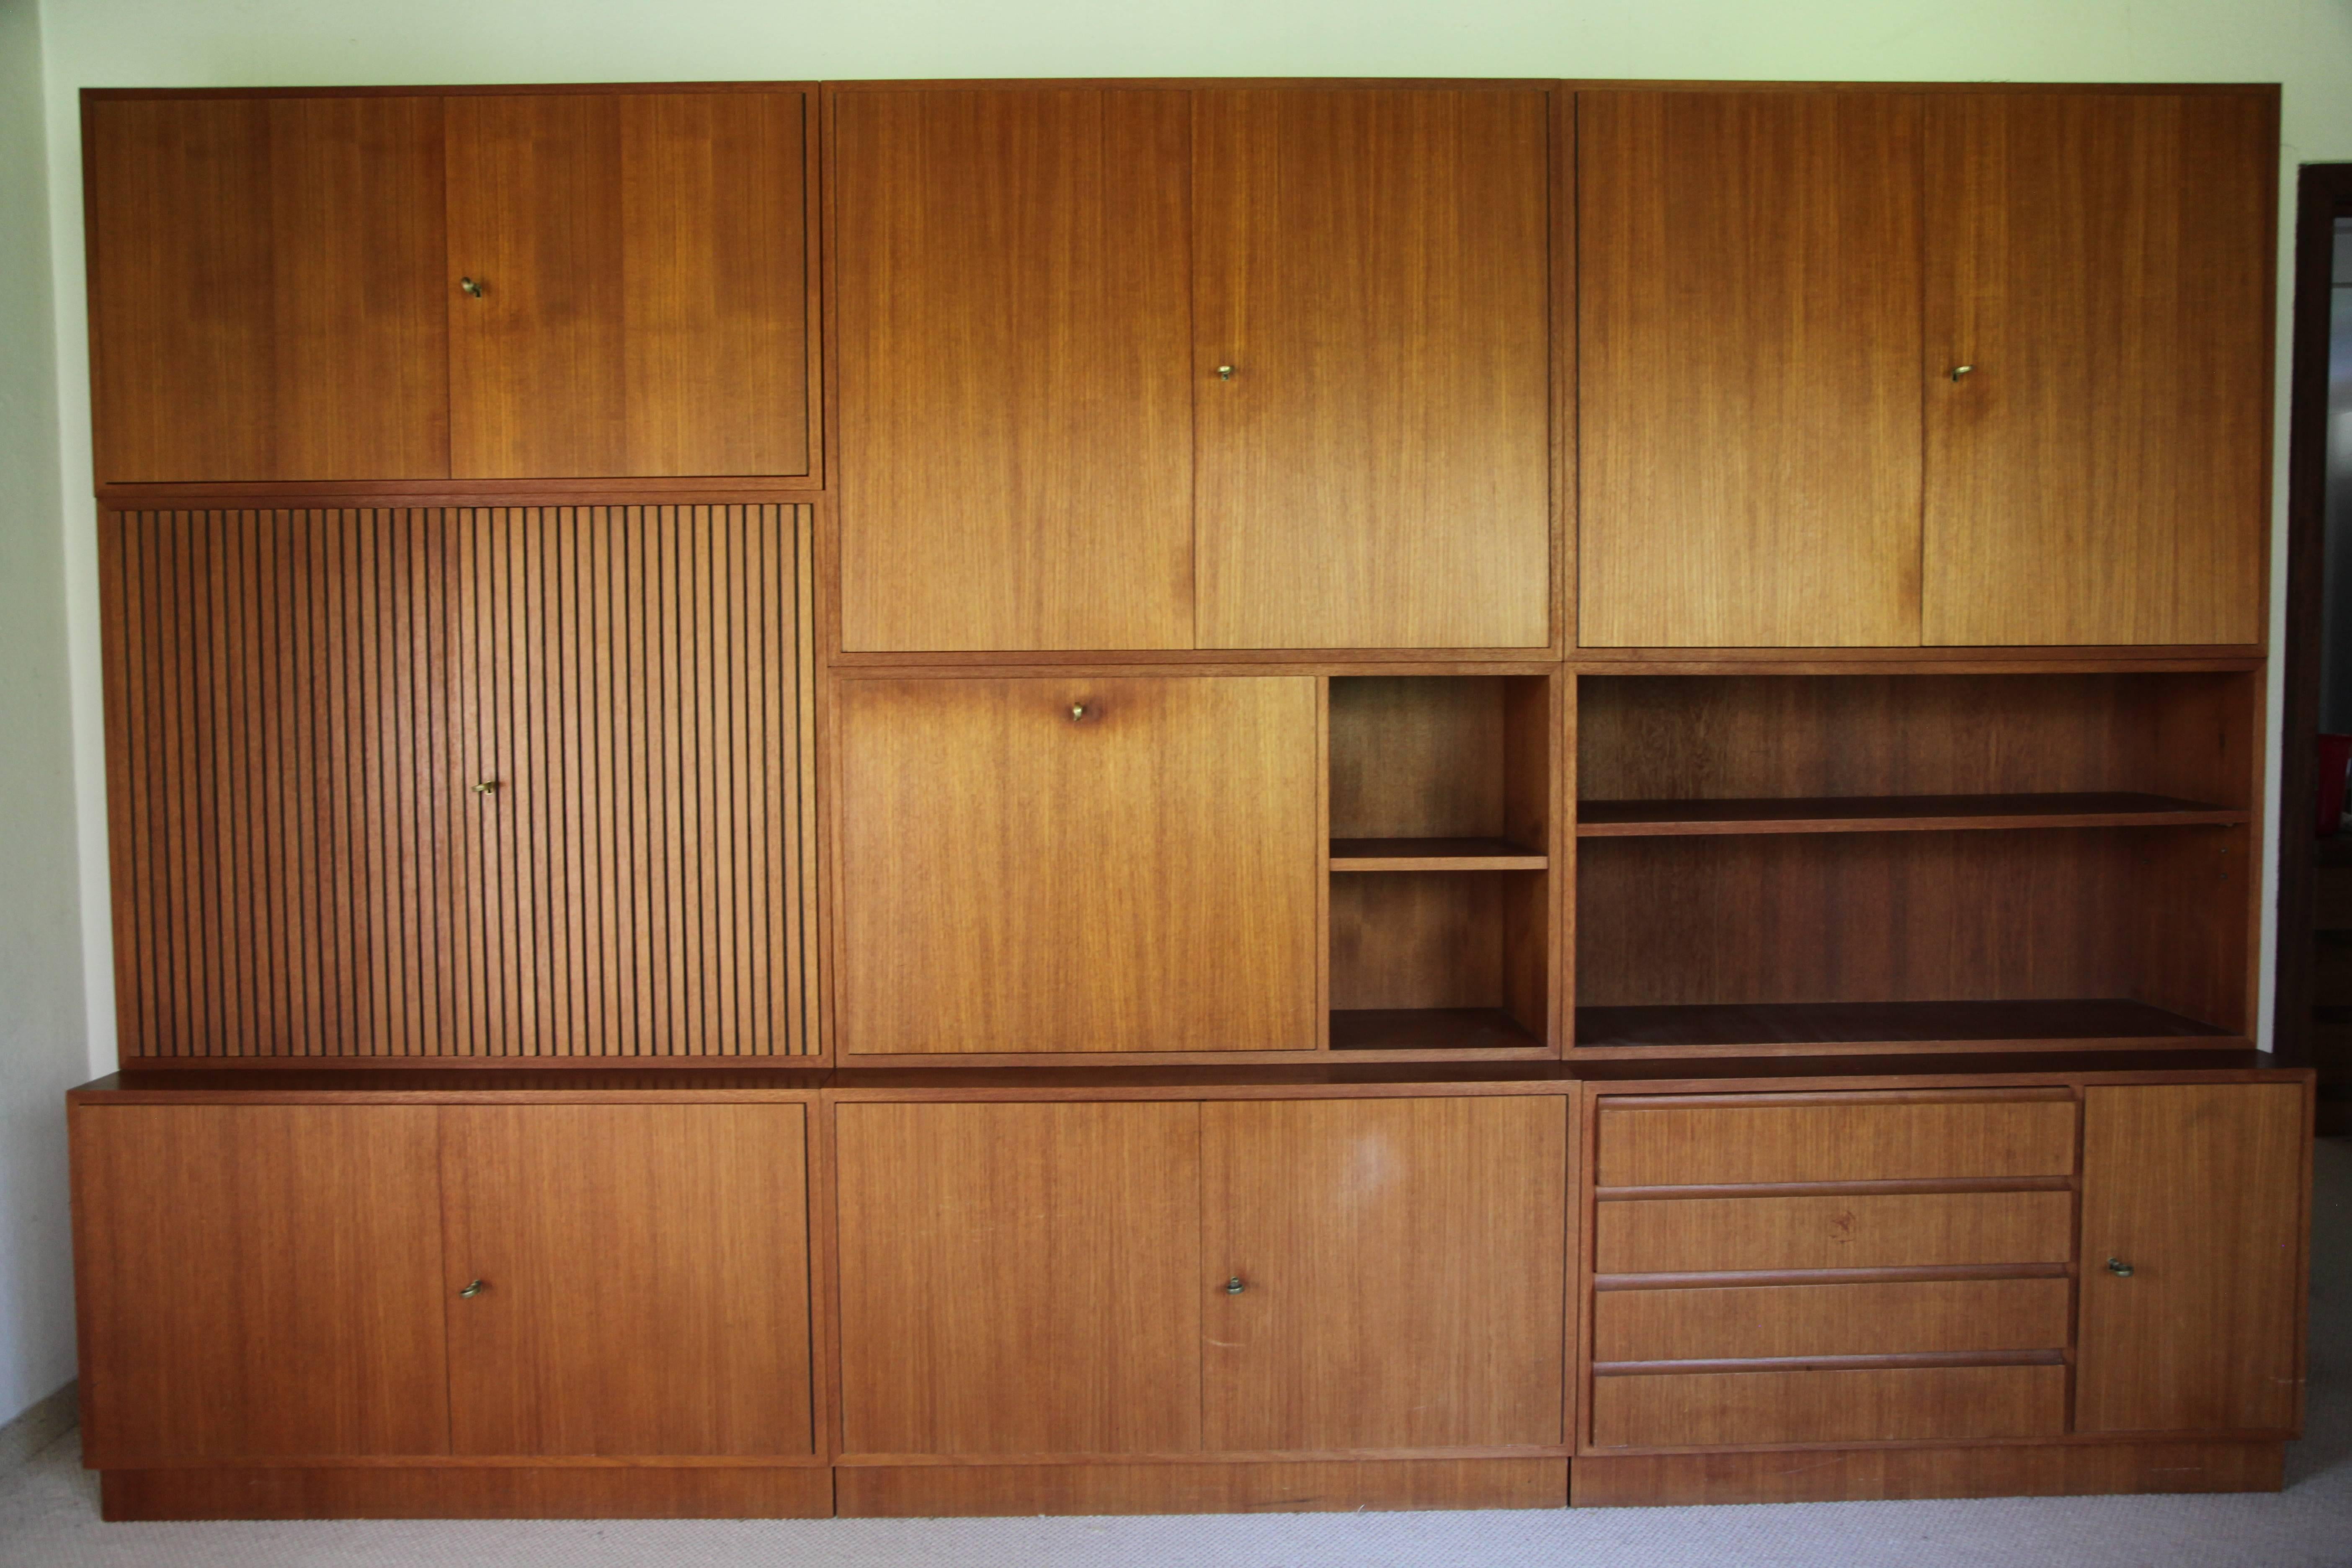 Large sideboard with nine modular wall elements in French walnut veneer from the WK-Satink series, designed in 1952 by Georg Satink, manufactured by WK Möbel, Germany.
The WK-Satink series consisted of 28 different pieces, which all could be